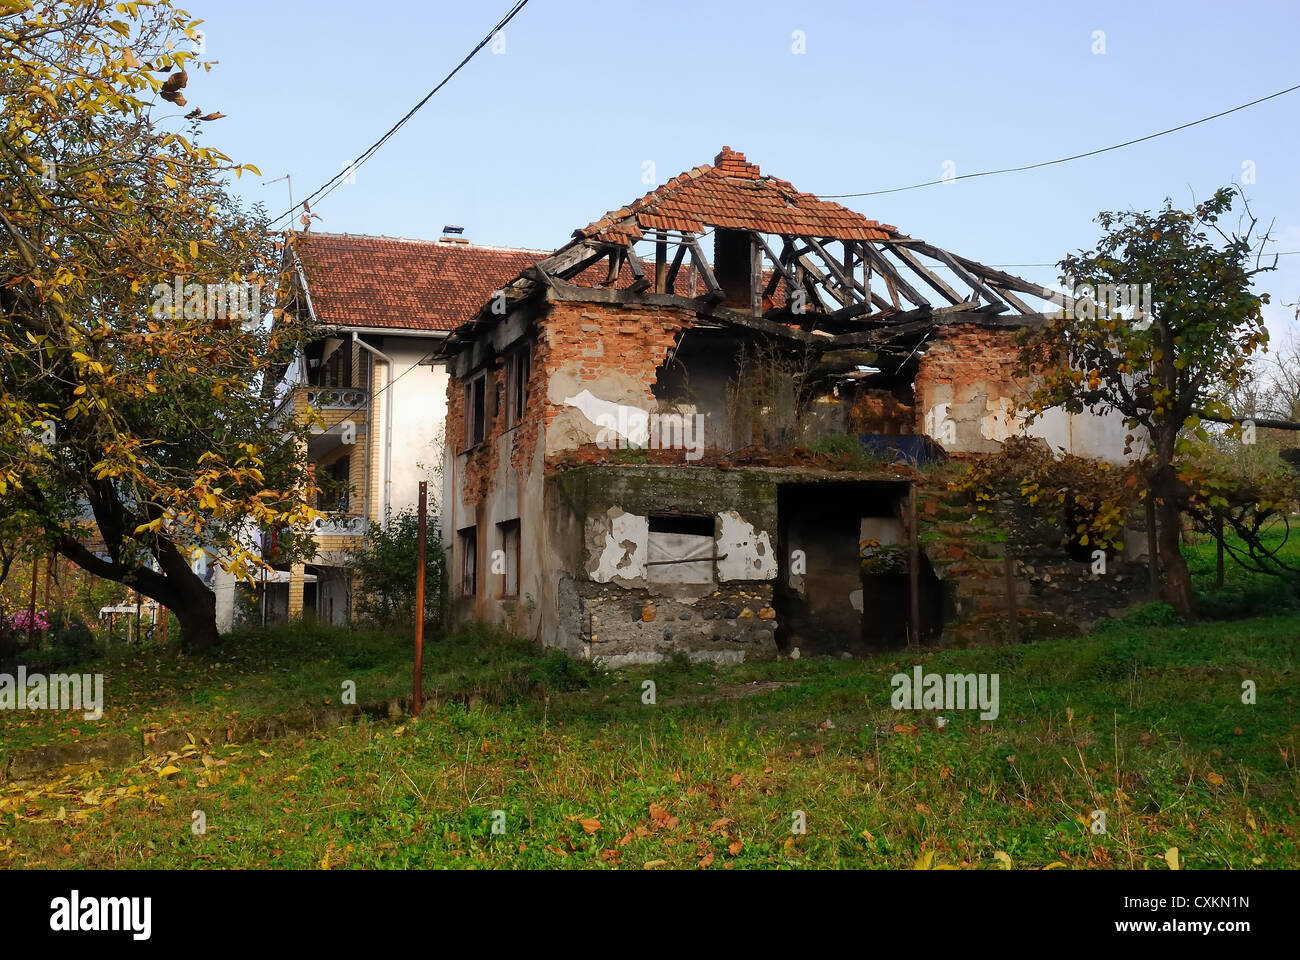 Bosnia and Herzegovina, Visegrad, Muslim houses destroyed by the members of the White Eagles, Serbian paramilitary group. Stock Photo